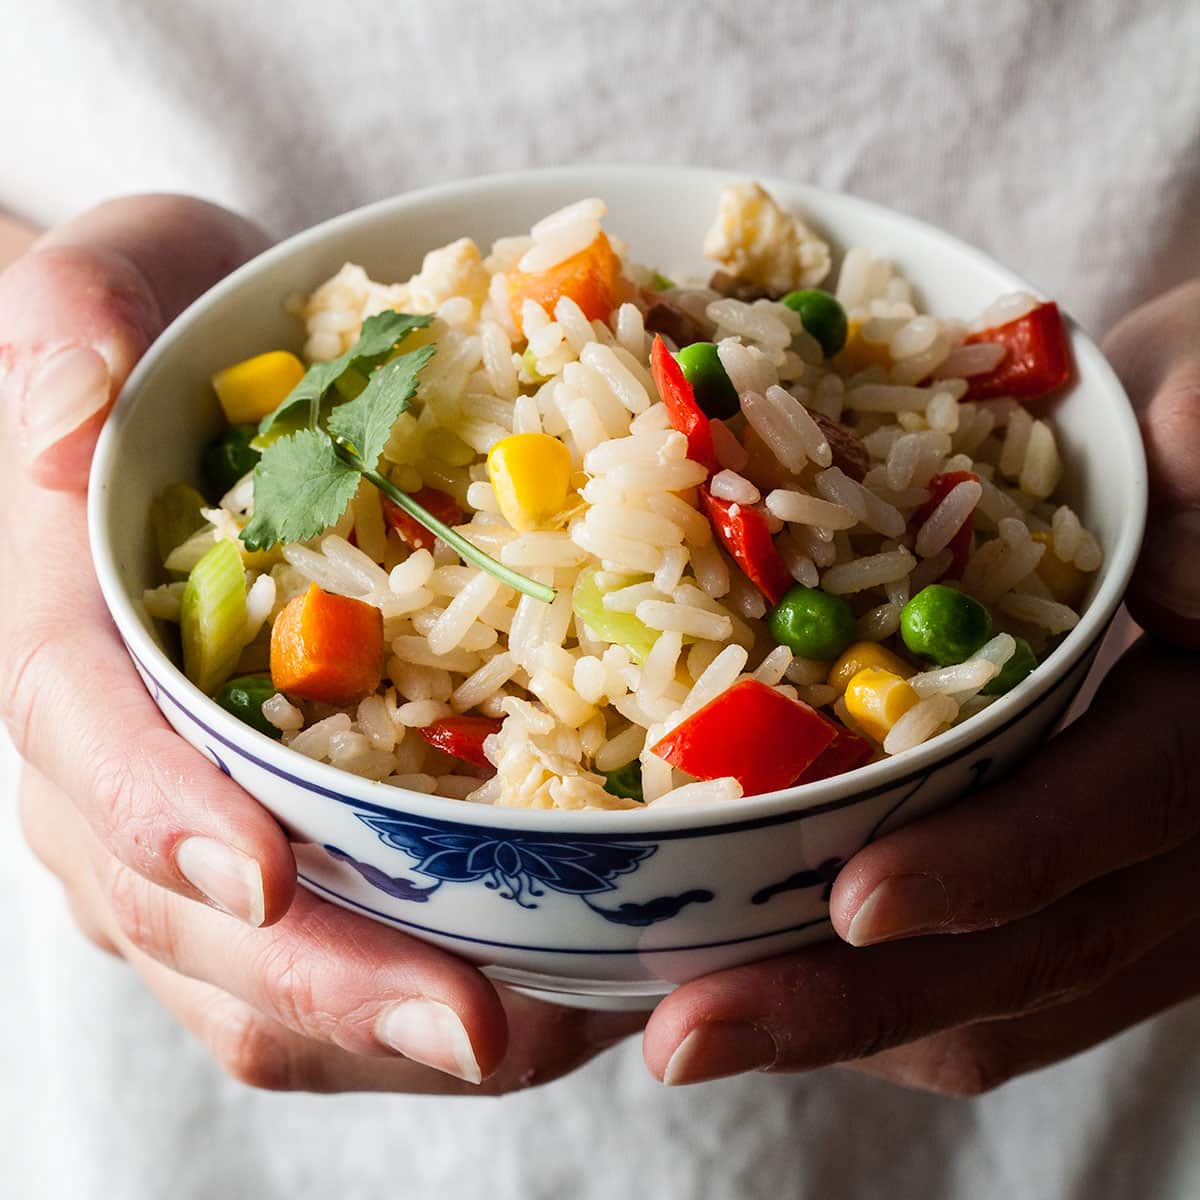 hands holding a bowl of egg fried rice